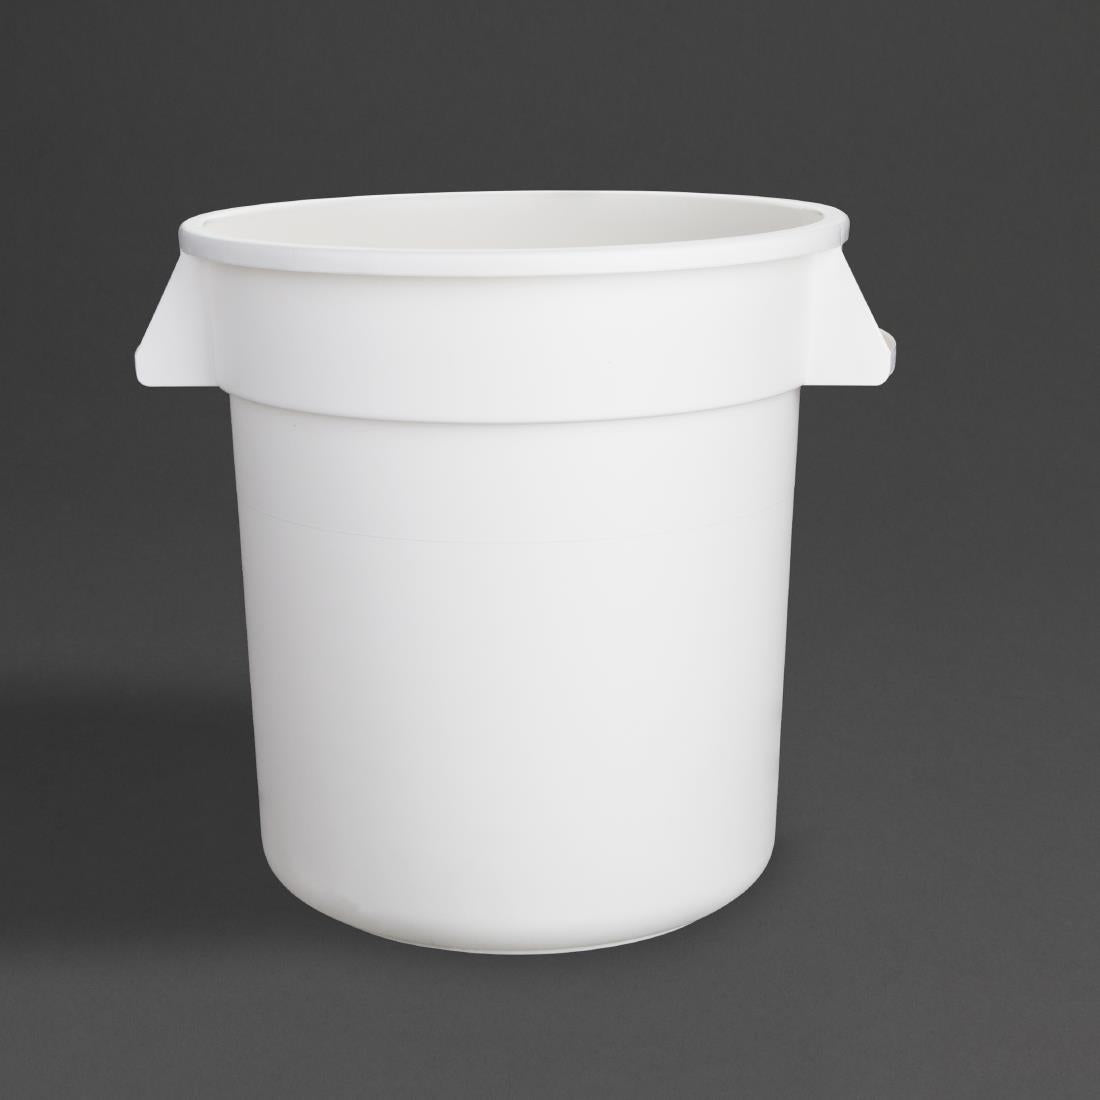 GG793 Vogue Polypropylene Round Container Bin White 76Ltr JD Catering Equipment Solutions Ltd